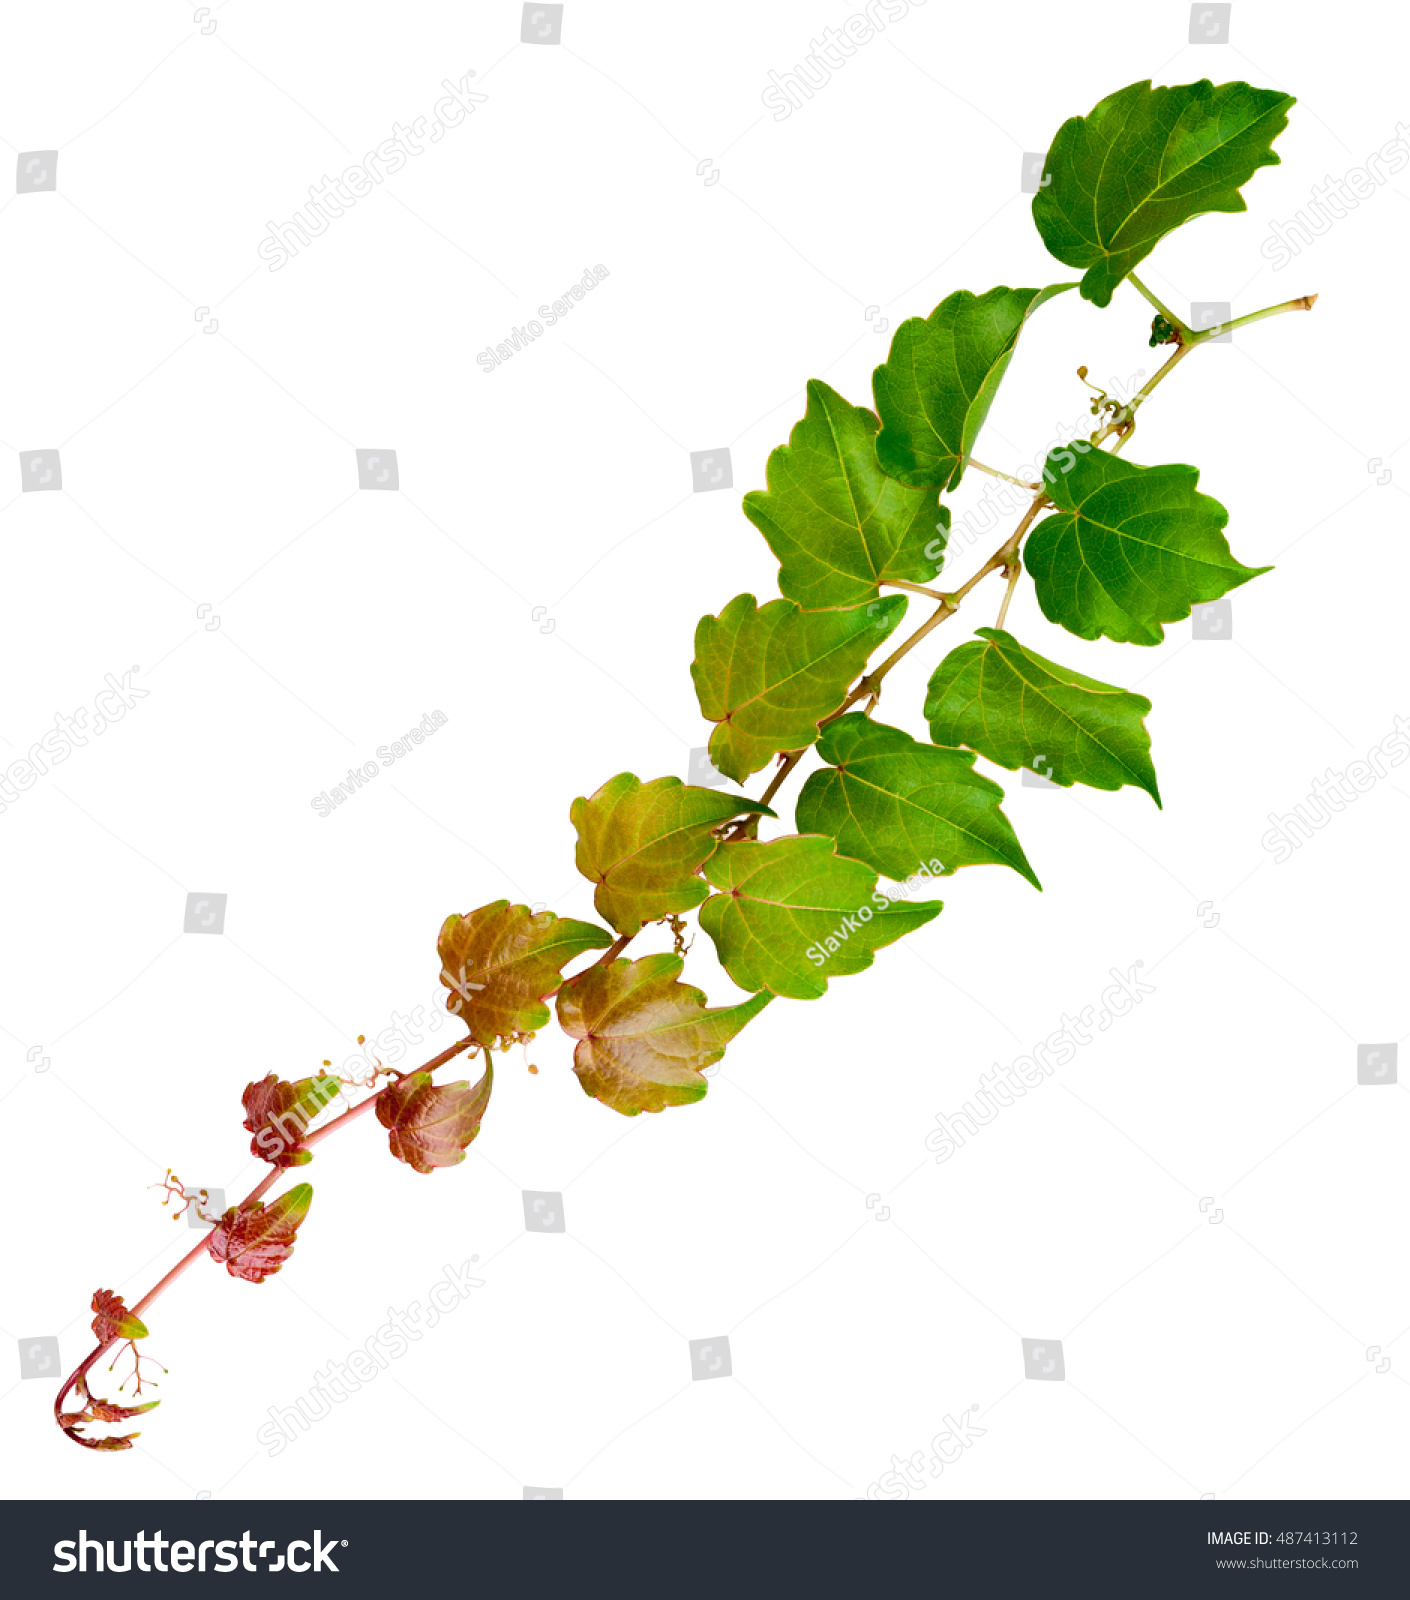 sprig of ivy with green leaves isolated on a white background #487413112